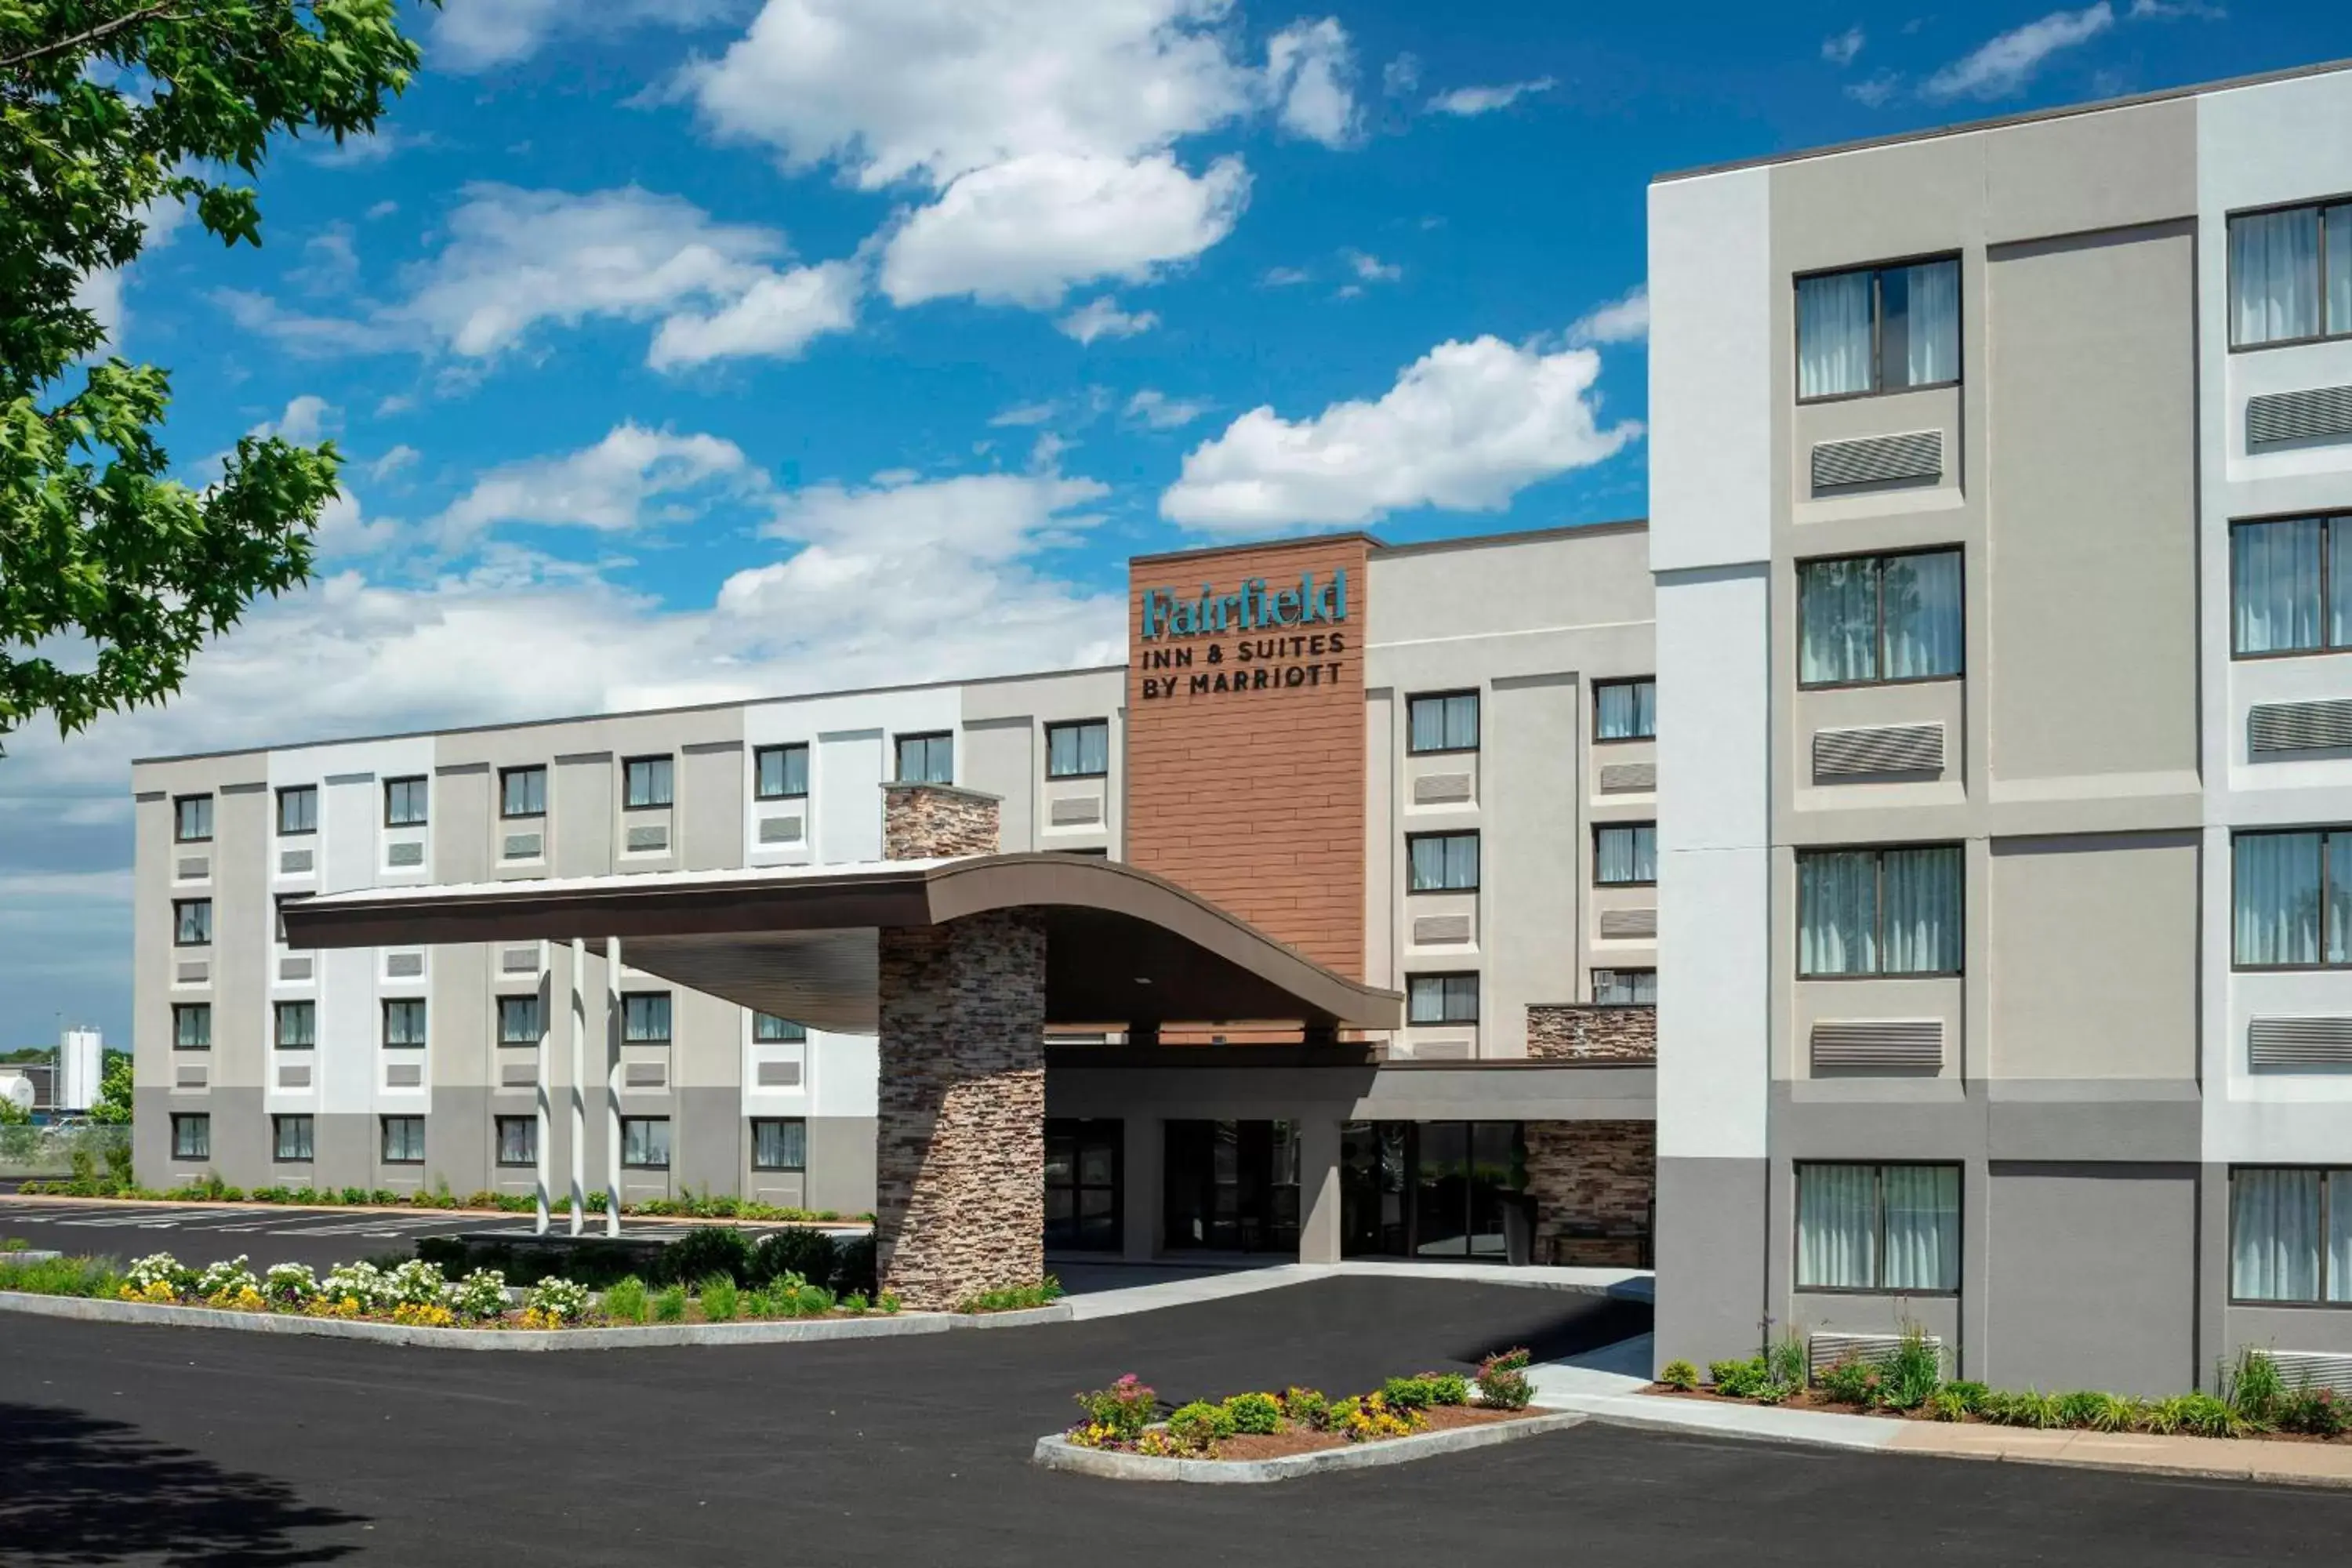 Property Building in Fairfield Inn & Suites by Marriott Providence Airport Warwick